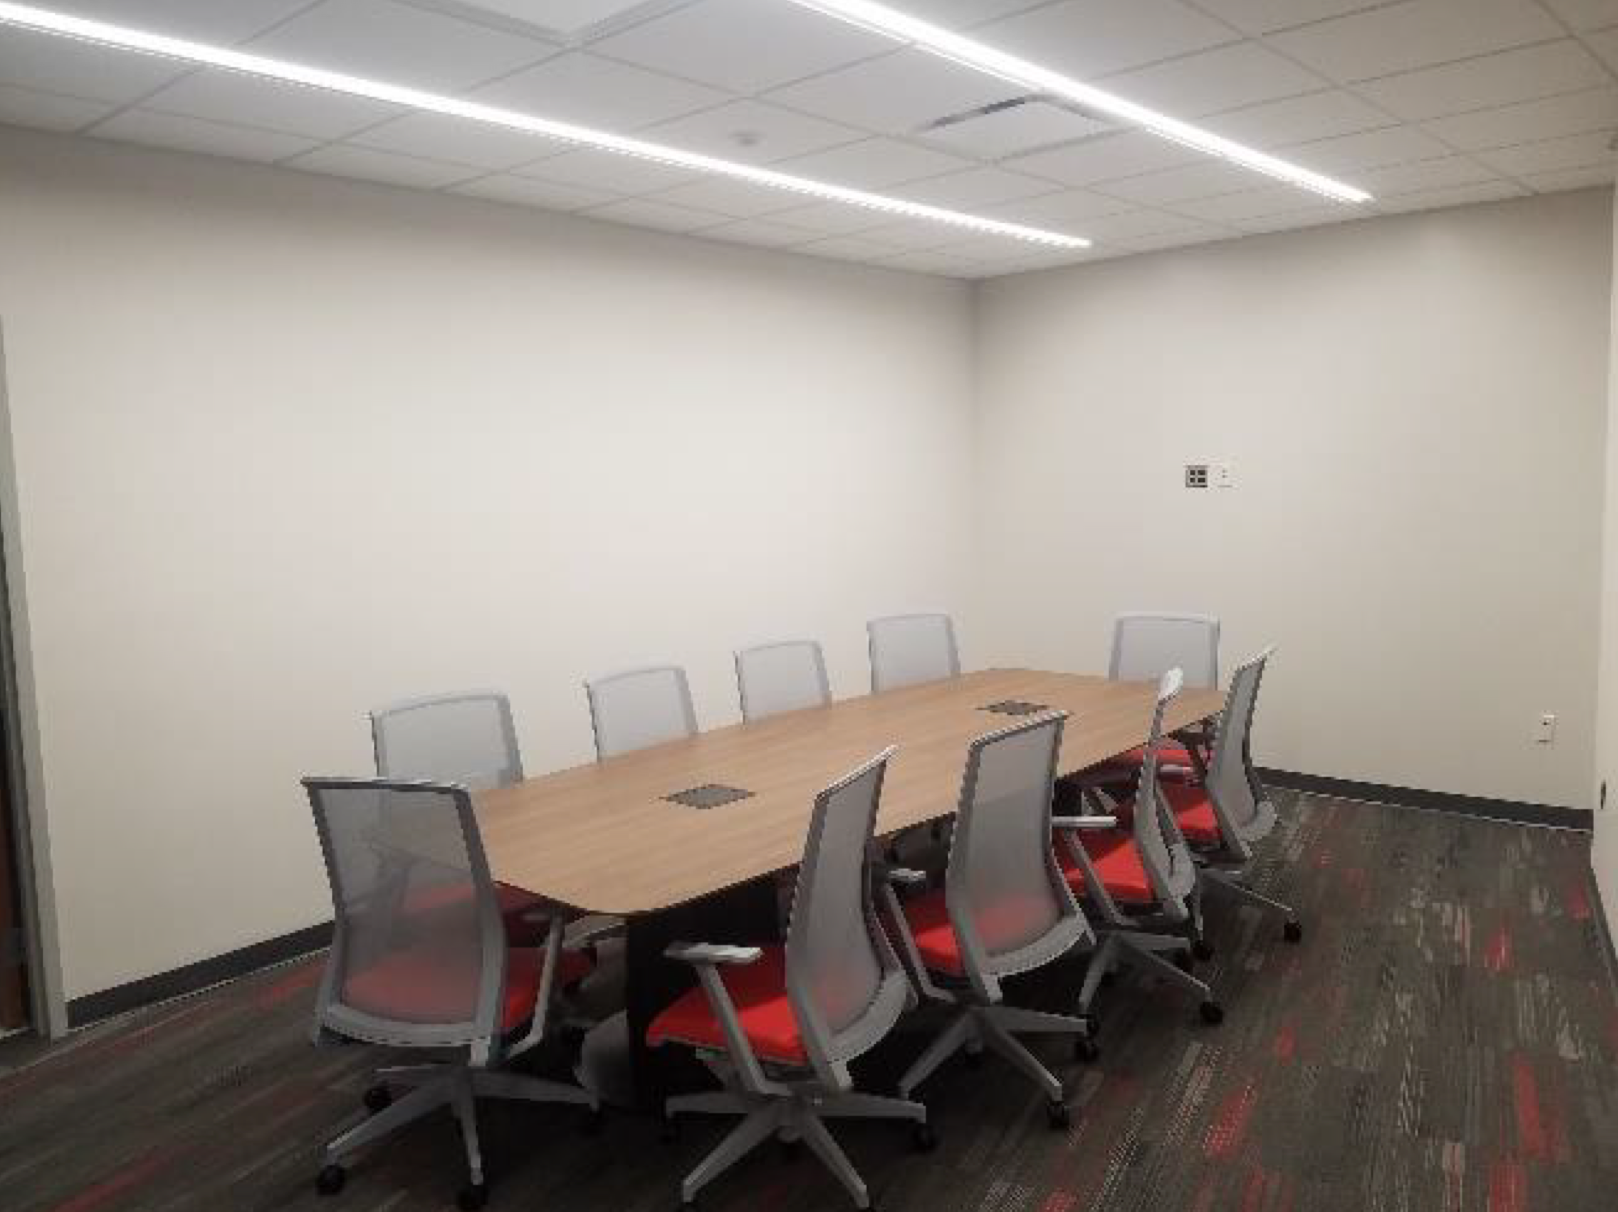 New conference room